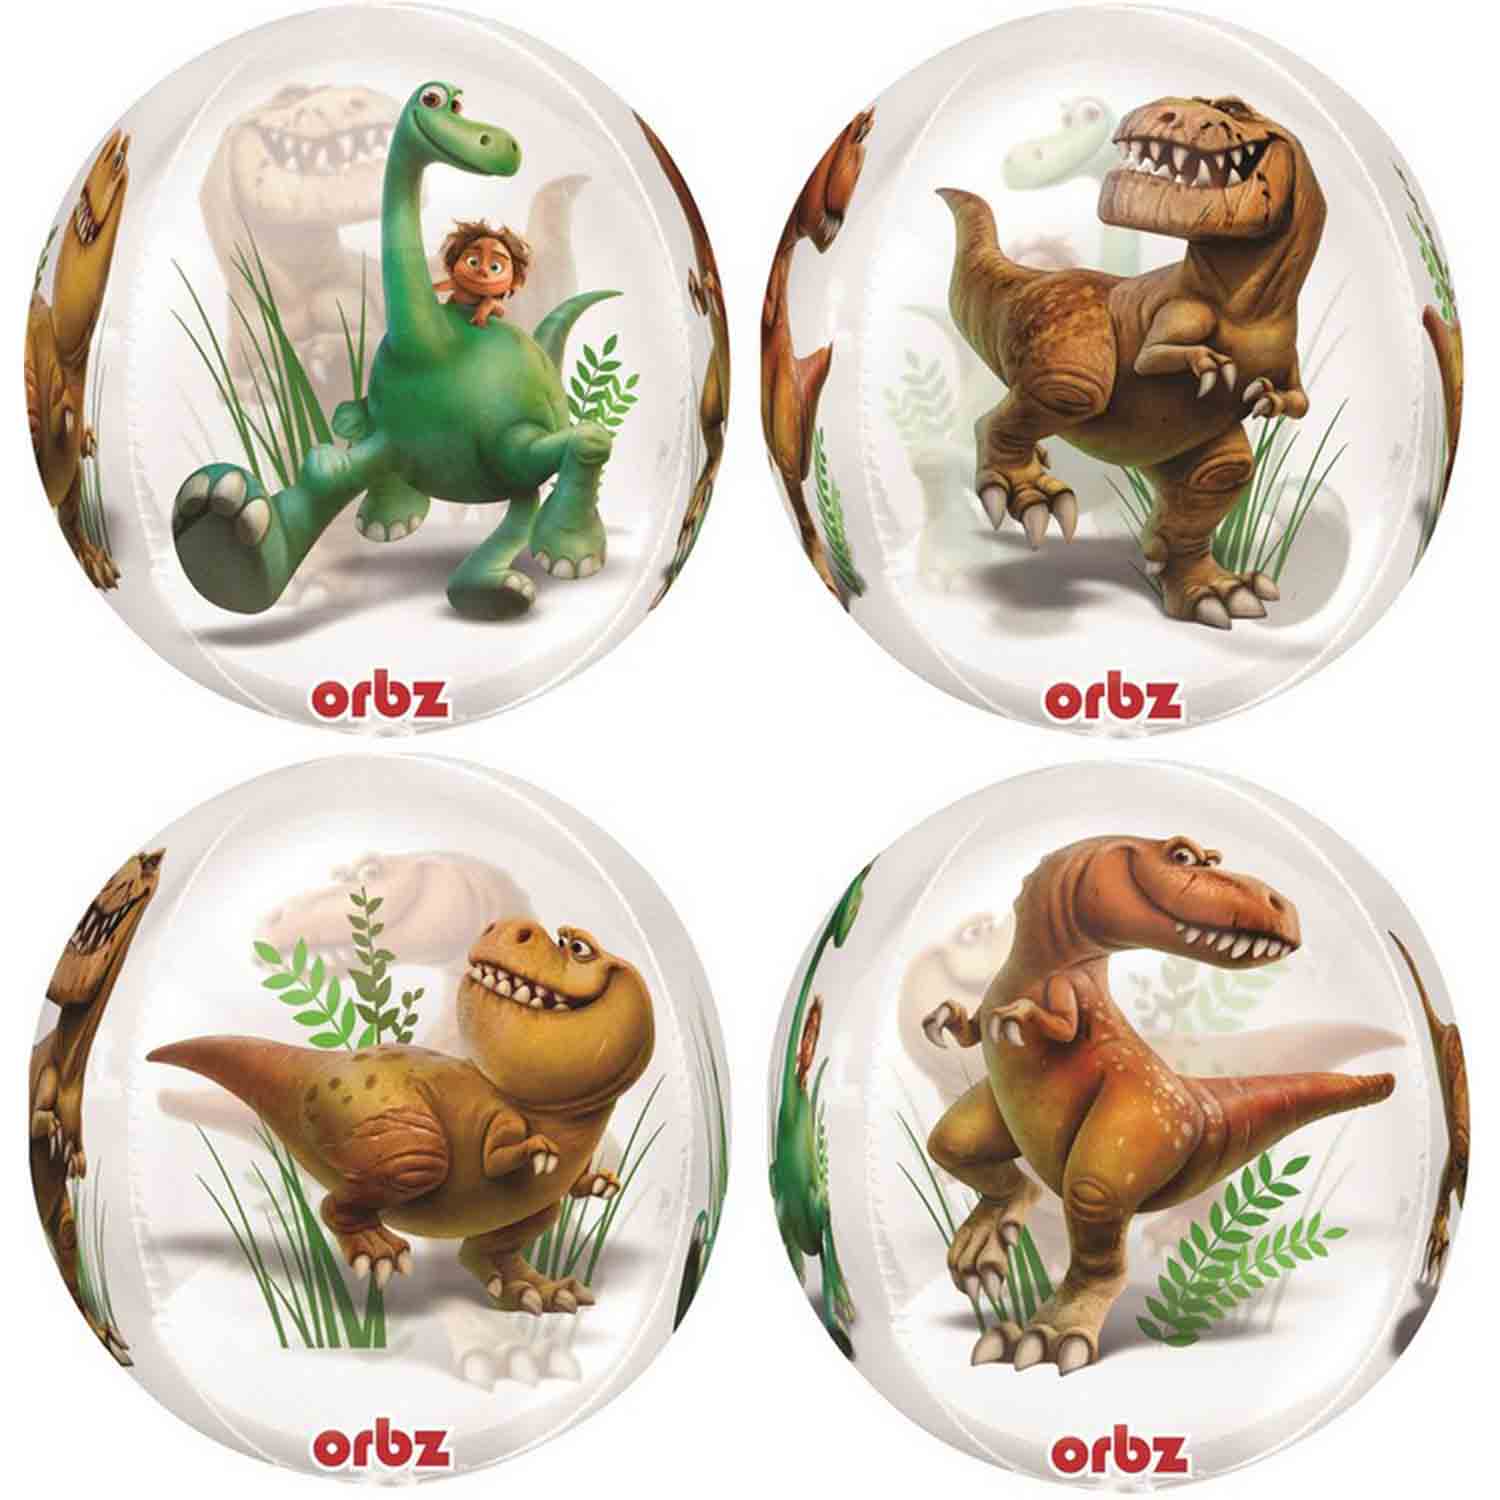 Roar into adventure with Party Empress' Dinosaur Party Decorations! Transport your guests back in time to the land of the dinosaurs with our exciting range of prehistoric-themed decor!